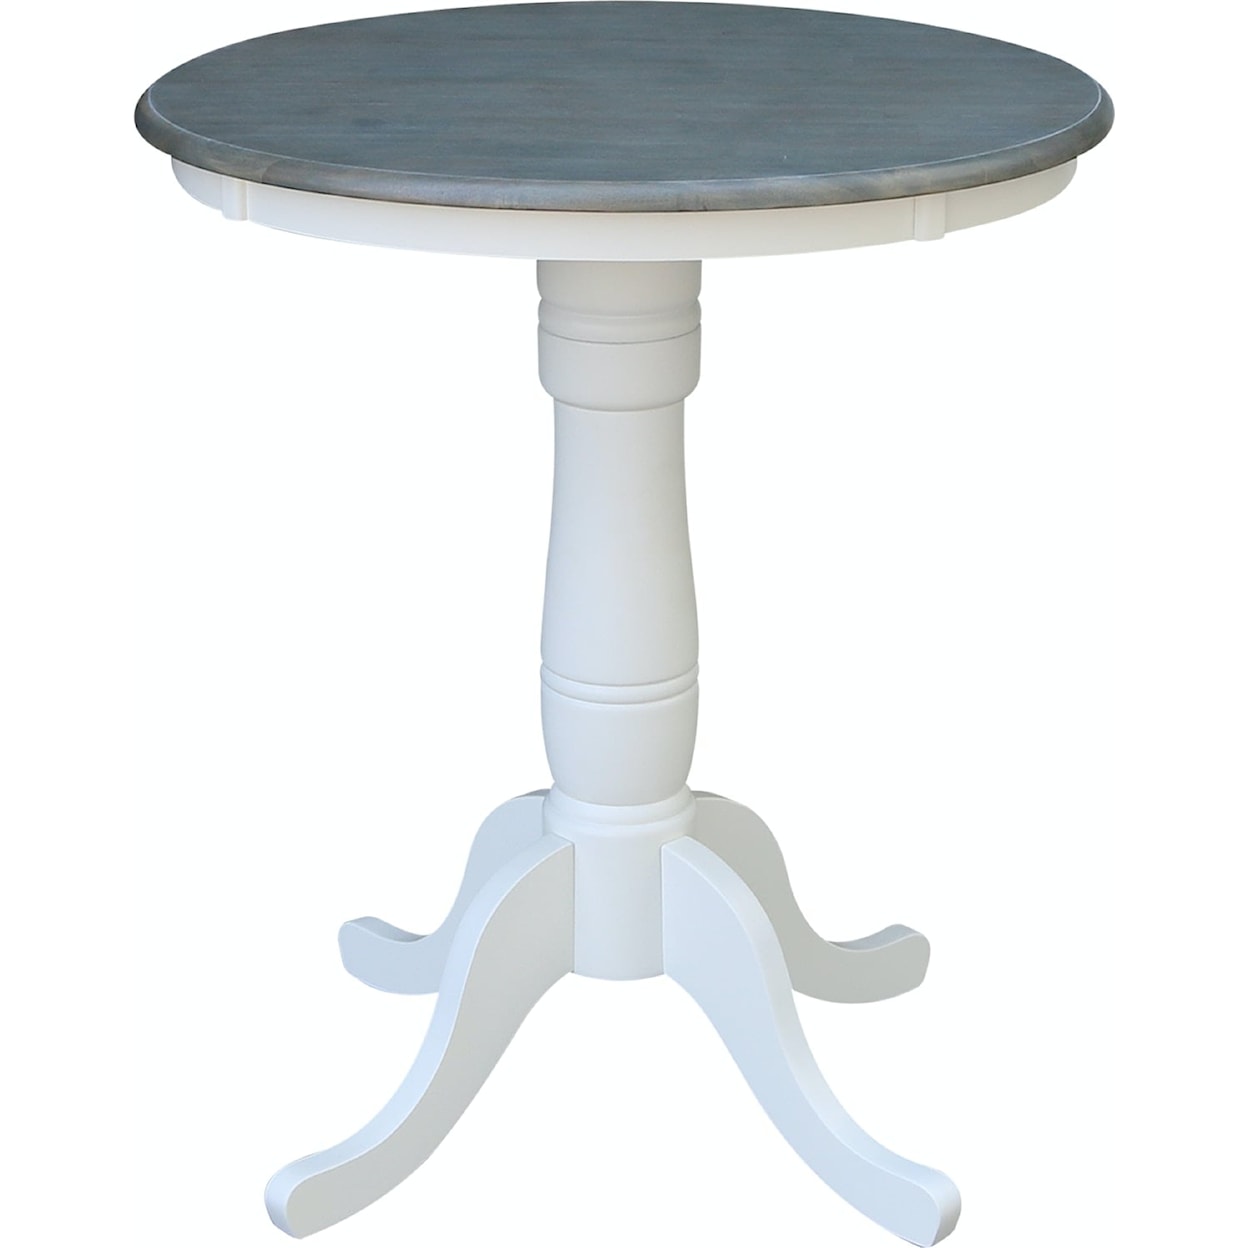 John Thomas Dining Essentials 30'' Pedestal Table in Heather Gray/ White